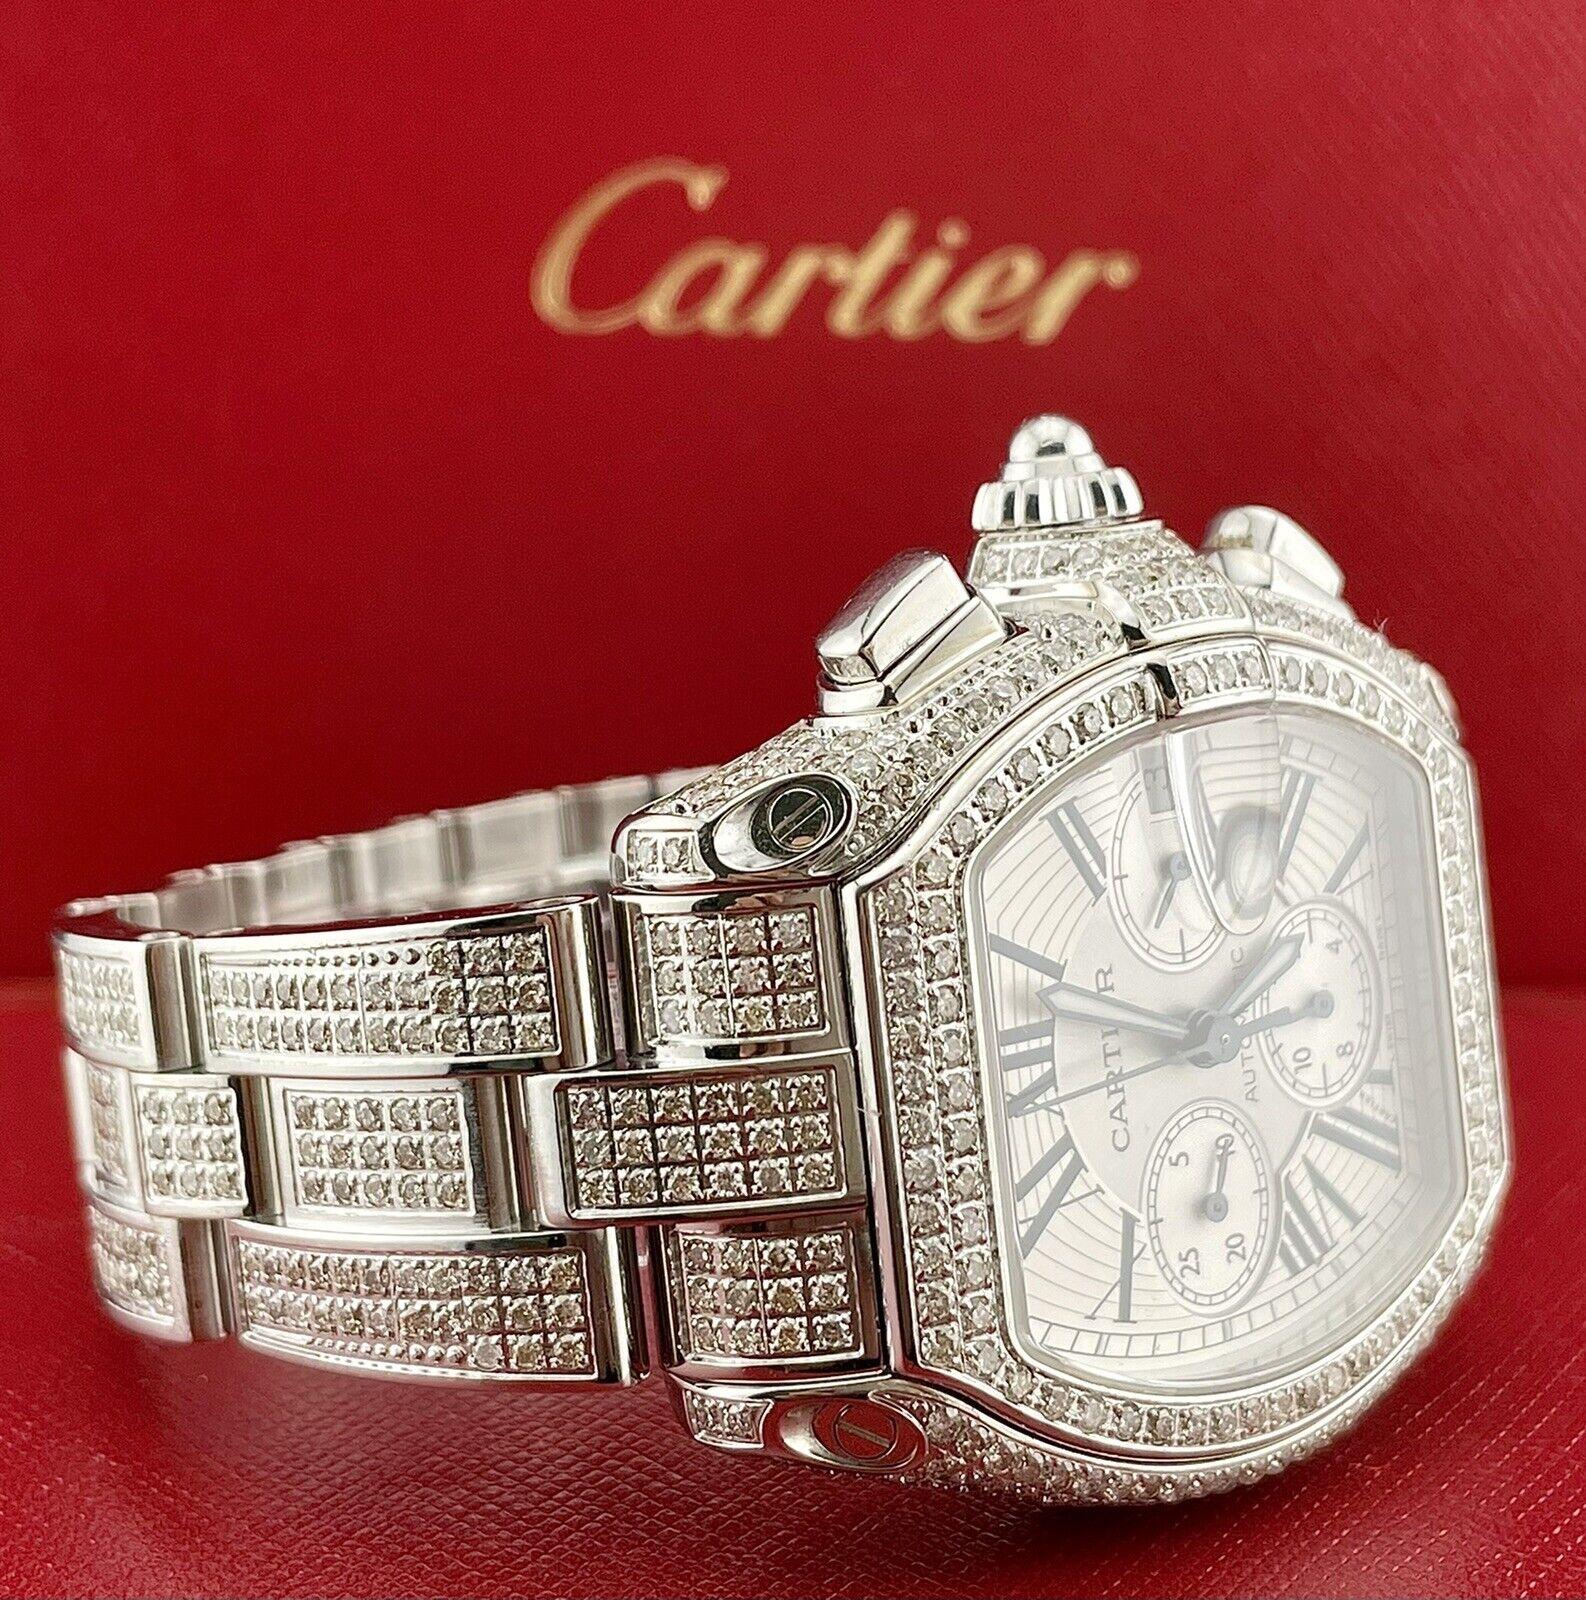 Cartier Roadster XL 43mm Watch. A Pre-owned watch w/ Gift Box. The Watch Itself is Authentic and Comes with Authenticity Card. Watch Reference is 2618 and is in Great Condition (See Pictures). The dial color is White is and material is Stainless